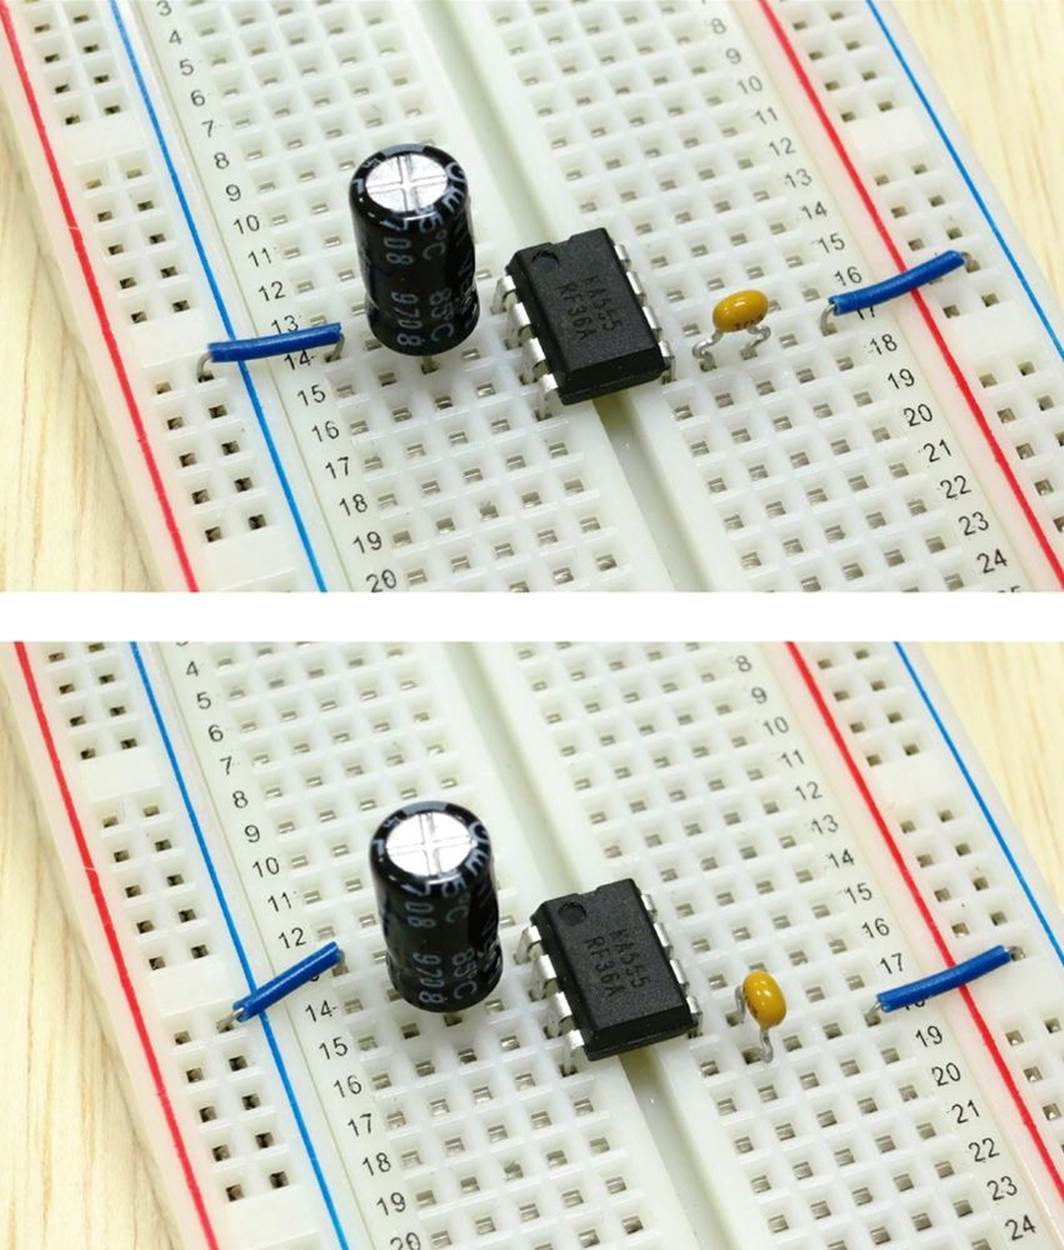 The two most common types of breadboarding errors are illustrated in the upper photograph, and are shown corrected in the lower photograph.